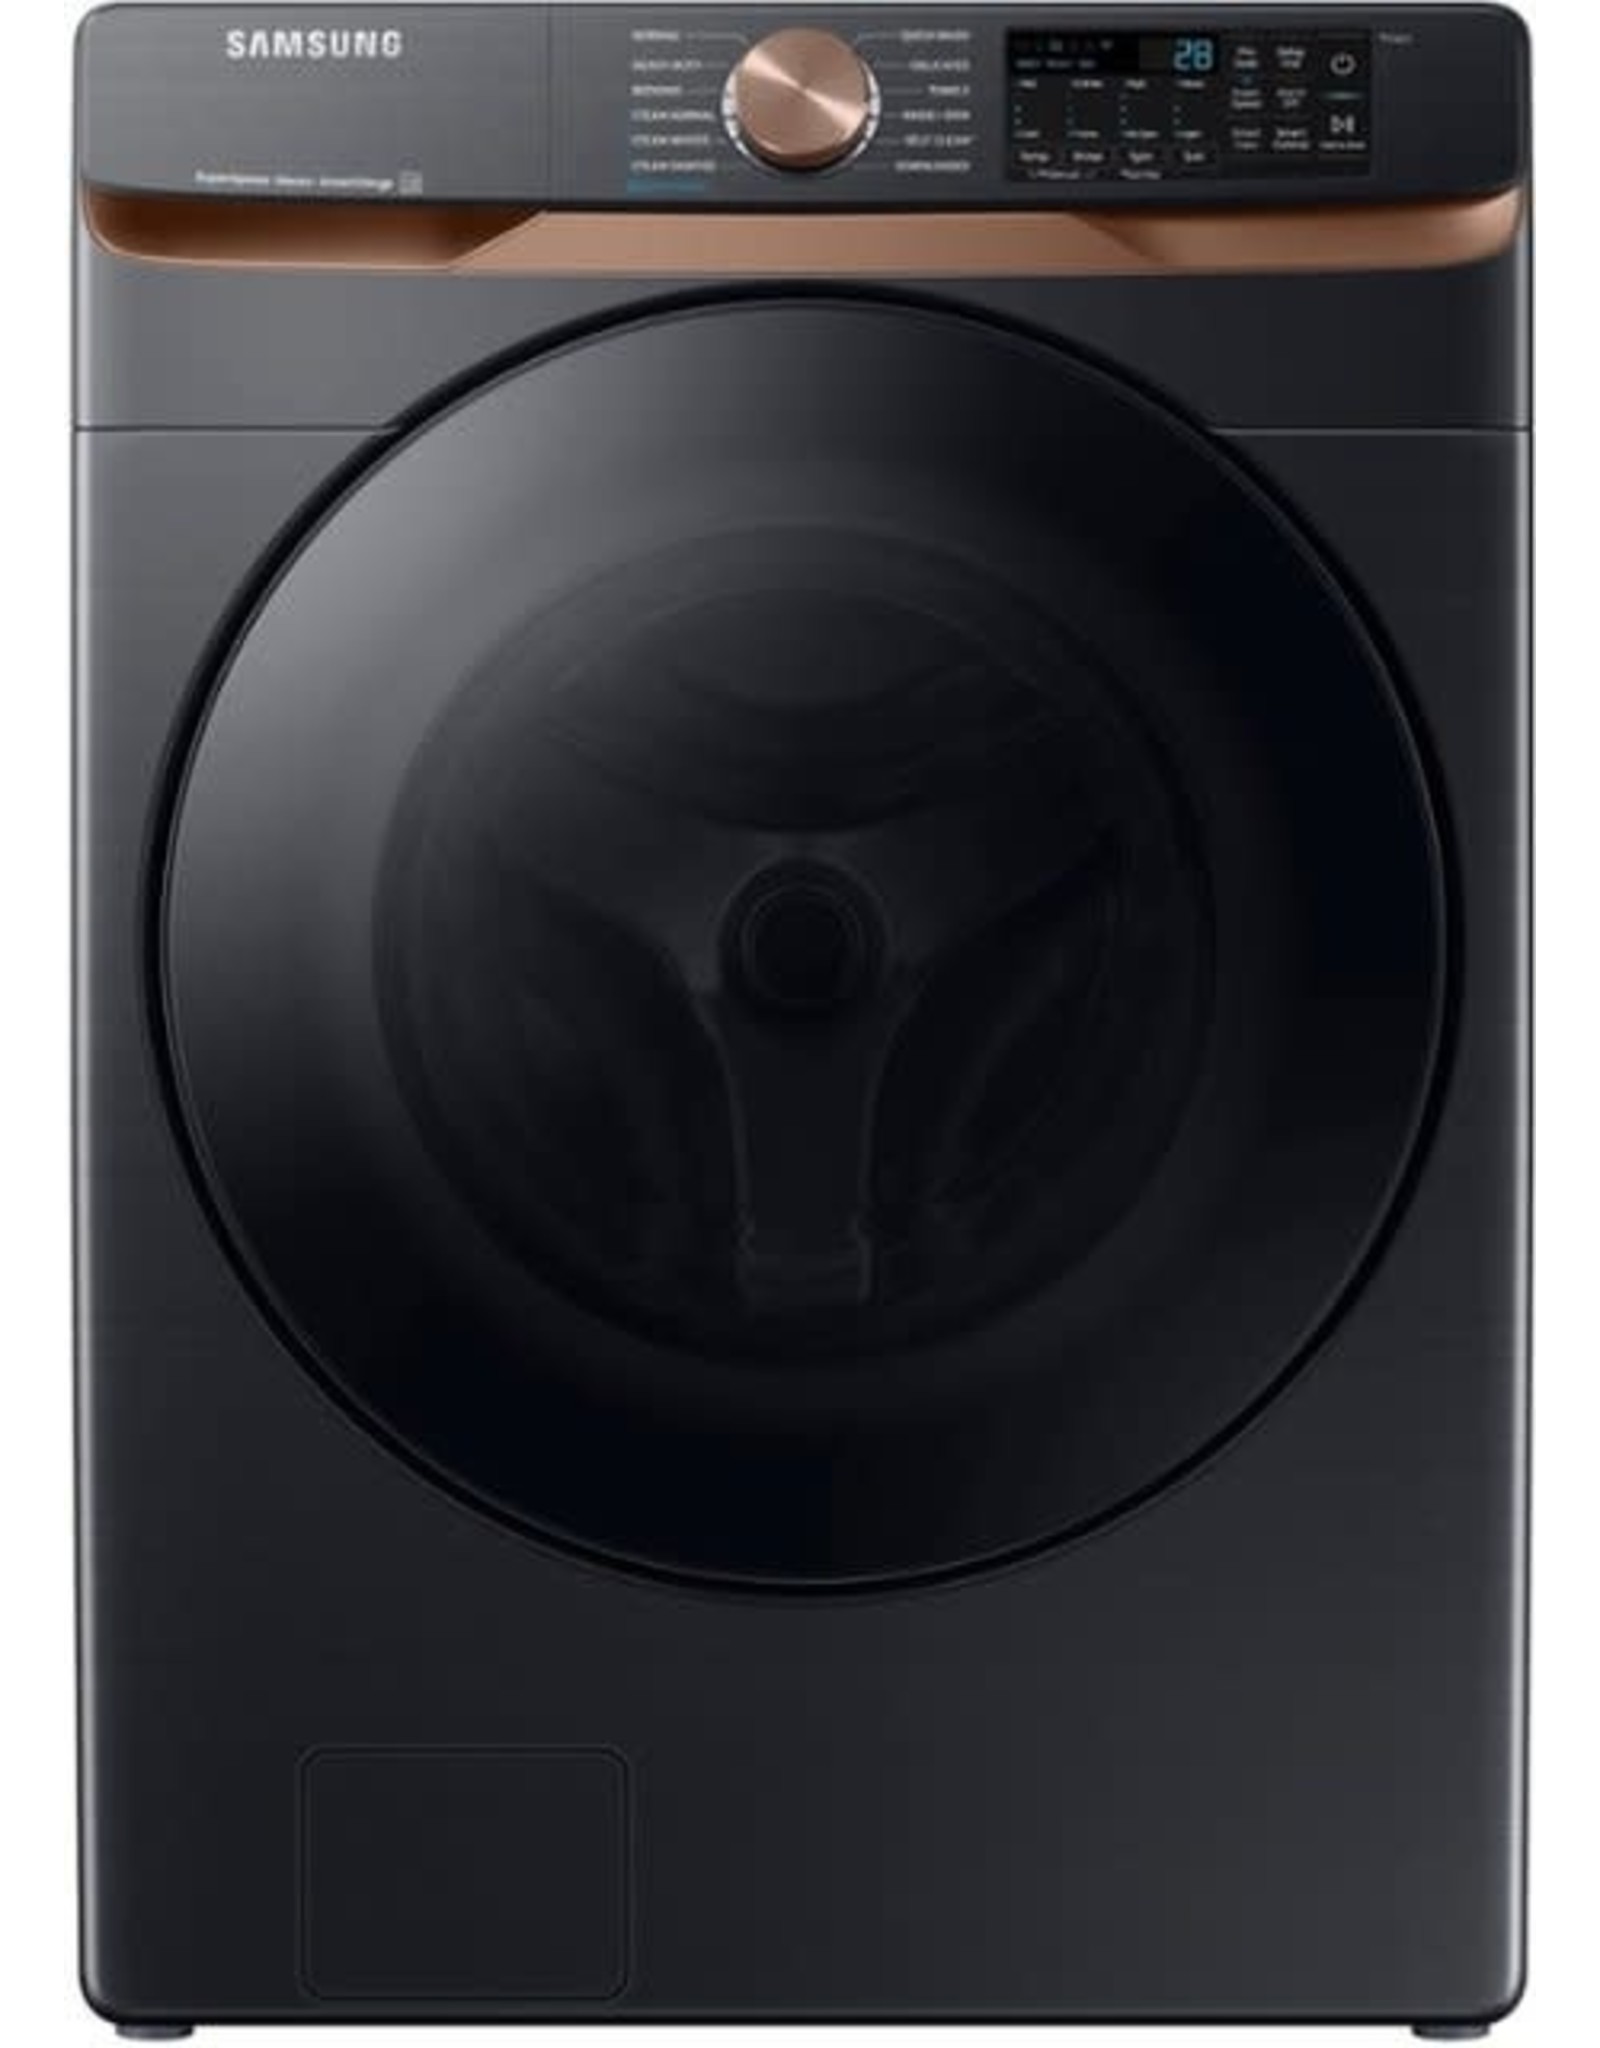 SAMSUNG C.k WF50BG8300AV  5 cu. ft. Extra Large Capacity Smart Front Load Washer in Brushed Black with Super Speed Wash and Steam